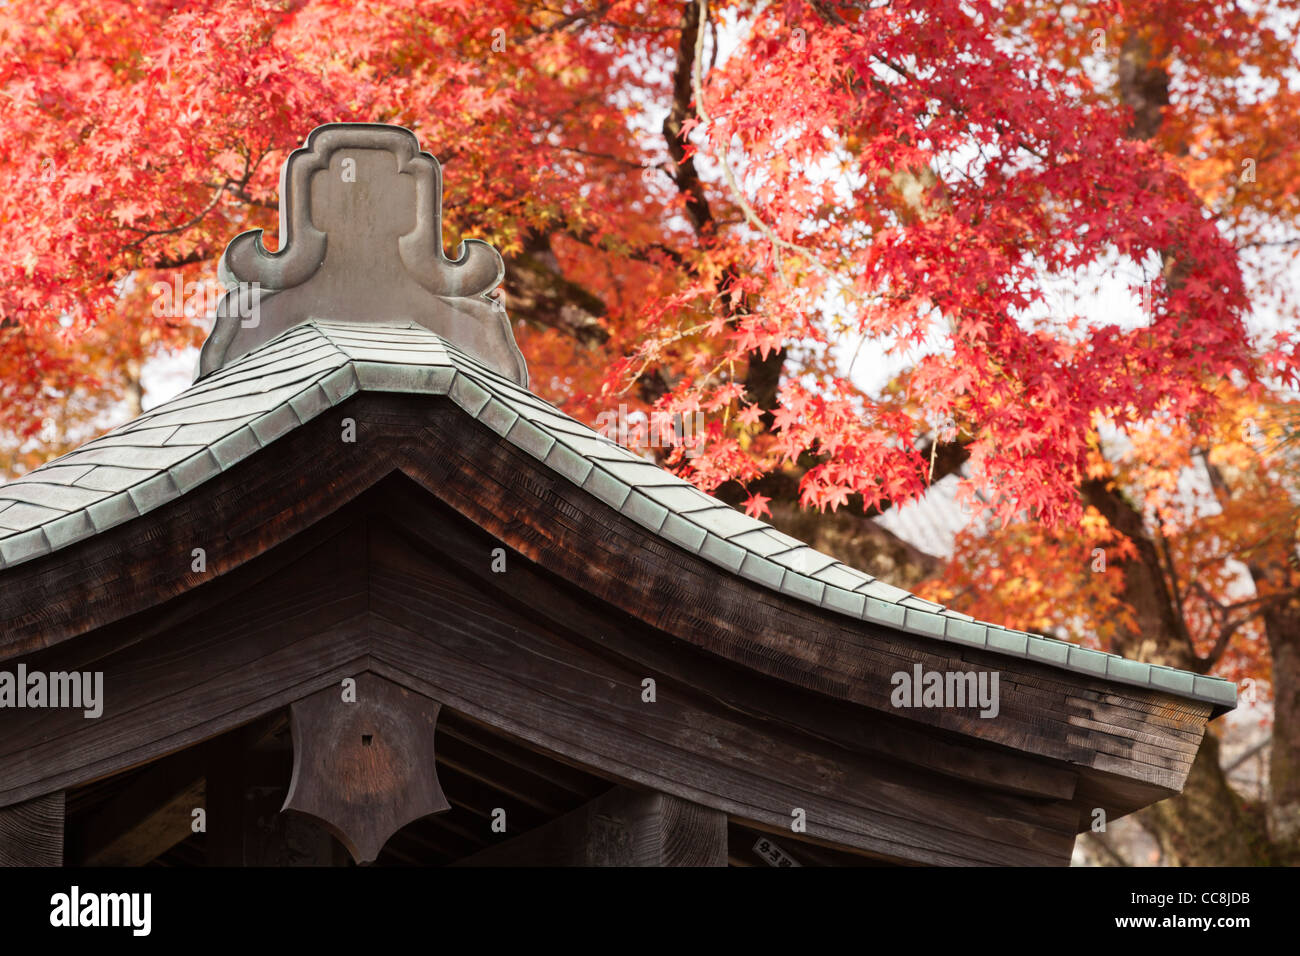 The roof of a small shrine against a background of autumn leaves at Arashiyama, on the western outskirts of Kyoto, Japan. Stock Photo